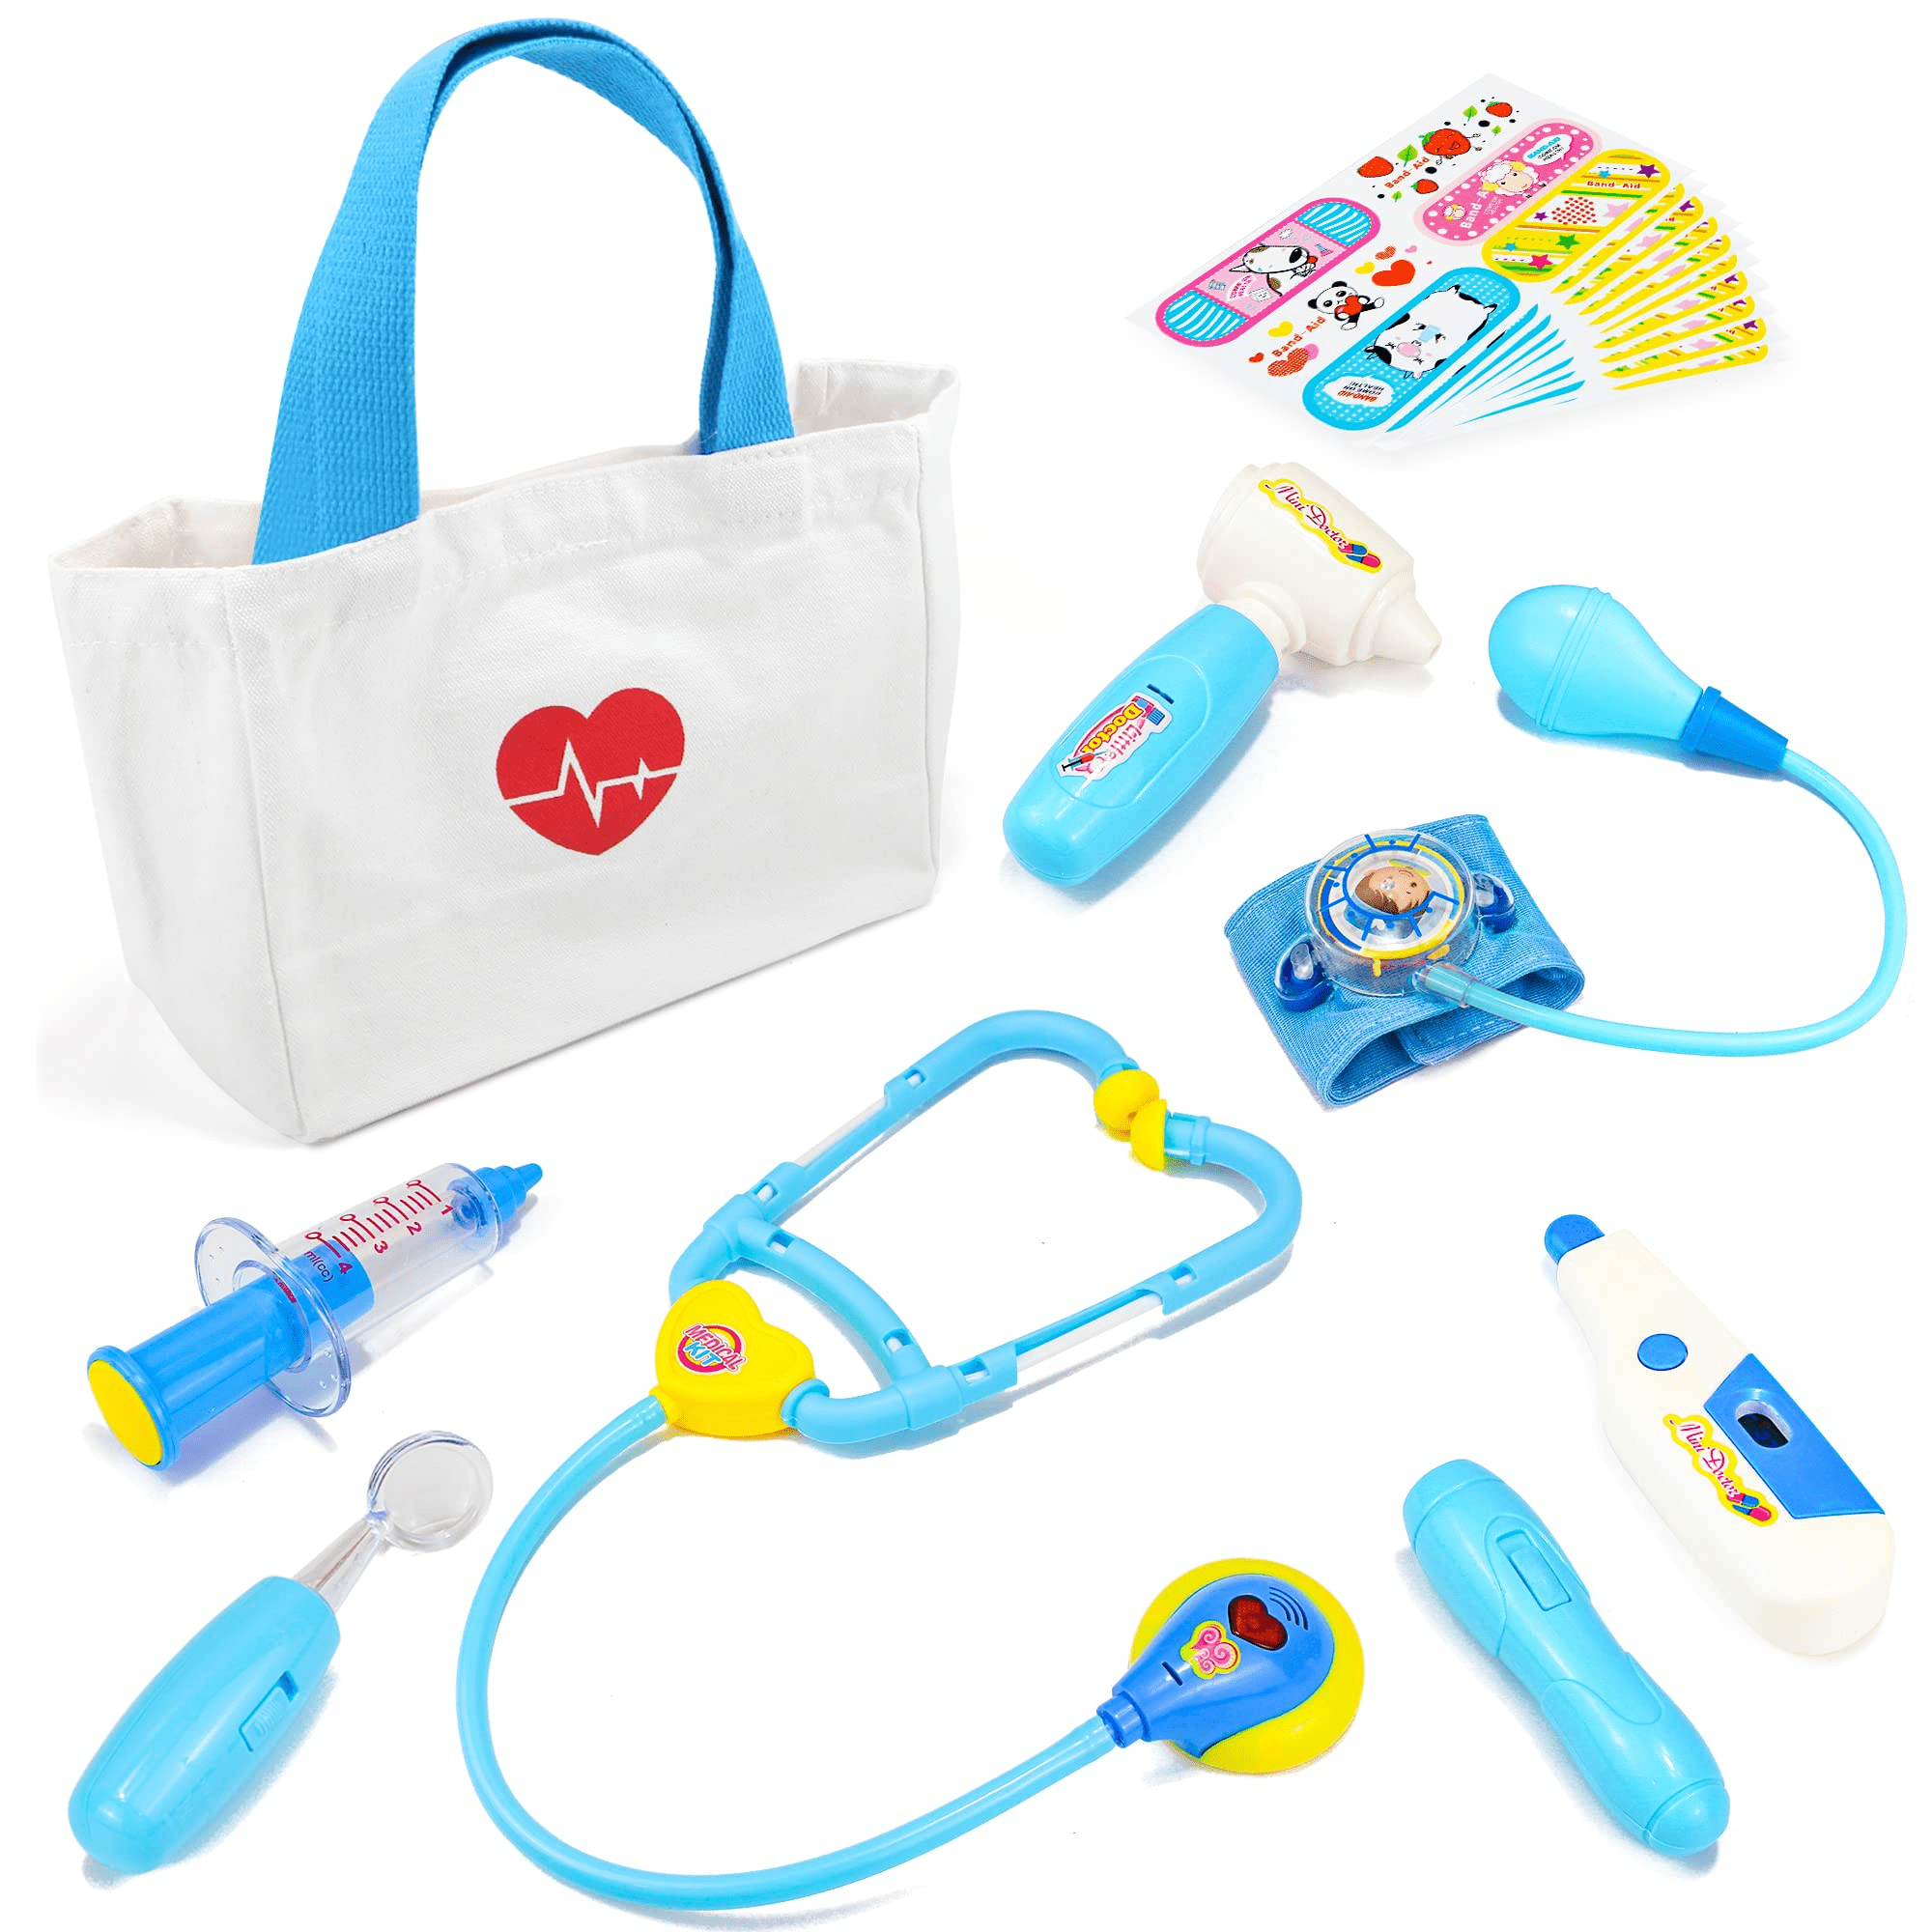  Doctor Playset Medical Kit Contains Children's Injections,  Lighted Play Stethoscope for Kids, Dentist kit for Kids 3-5 Pretend Play(30PCS)  (Blue Doctor kit) : Toys & Games